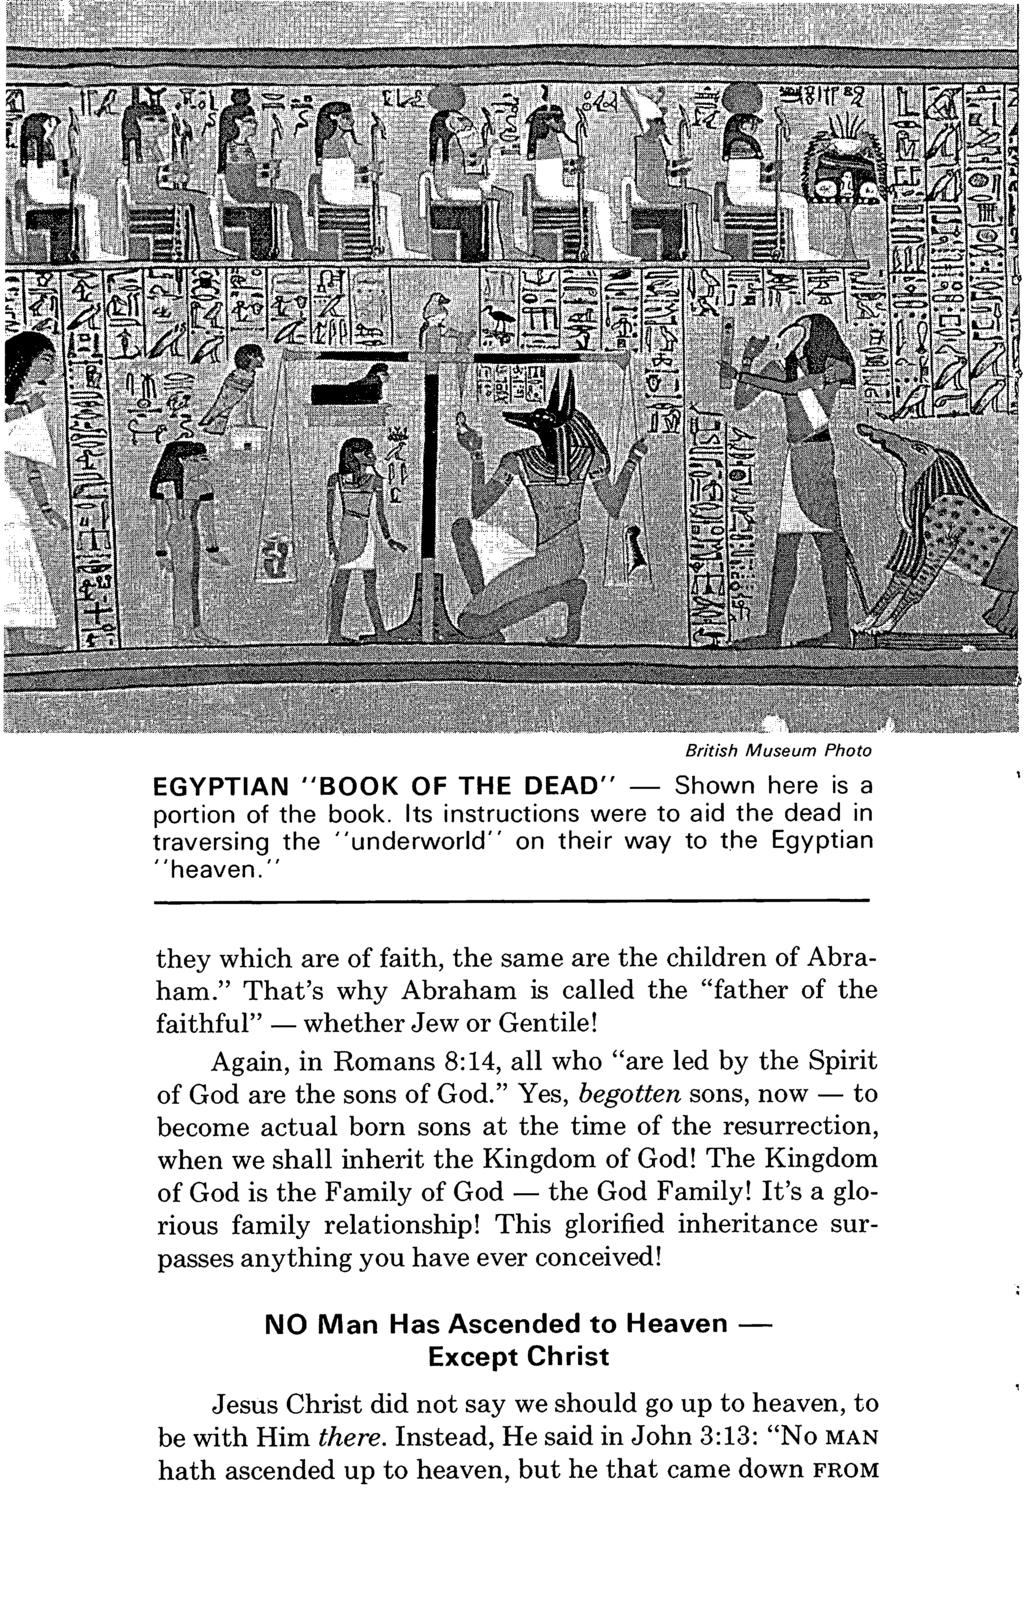 British Museum Photo EGYPTIAN "BOOK OF THE DEAD" - Shown here is a portion of the book. Its instructions were to aid the dead in traversing the "underworld" on their way to the Egyptian "heaven.